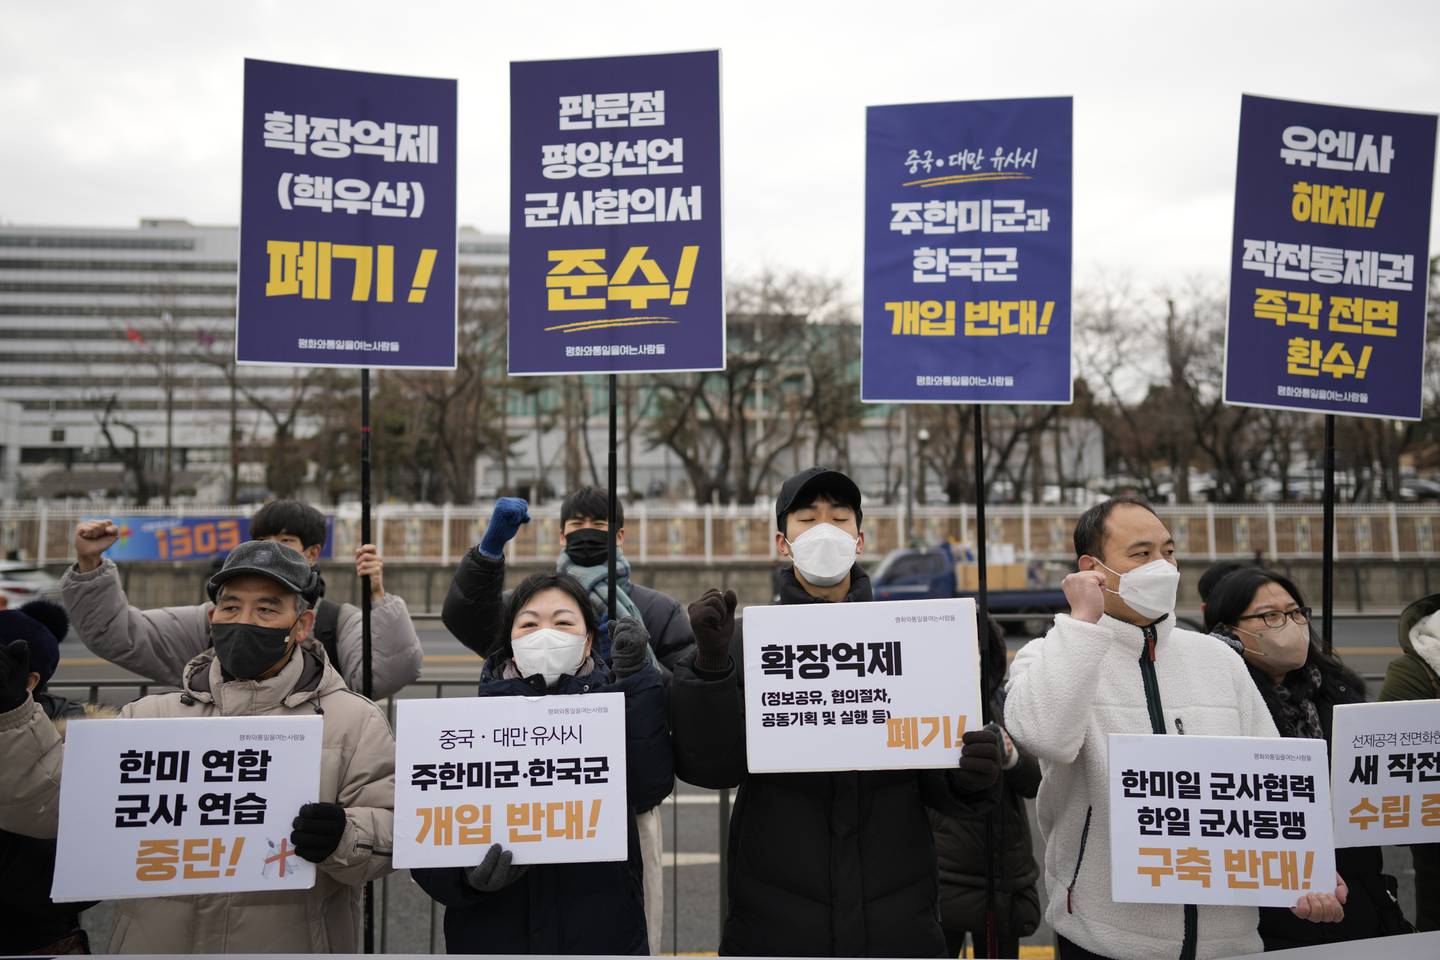 Protesters shout slogans during a rally outside of Defense Ministry, the venue for the meeting between U.S. Secretary of Defense Lloyd Austin and his South Korean counterpart Lee Jong-sup, in Seoul, South Korea, Tuesday, Jan. 31, 2023. A part of letters read "Stop the joint military exercise between the U.S. and South Korea."